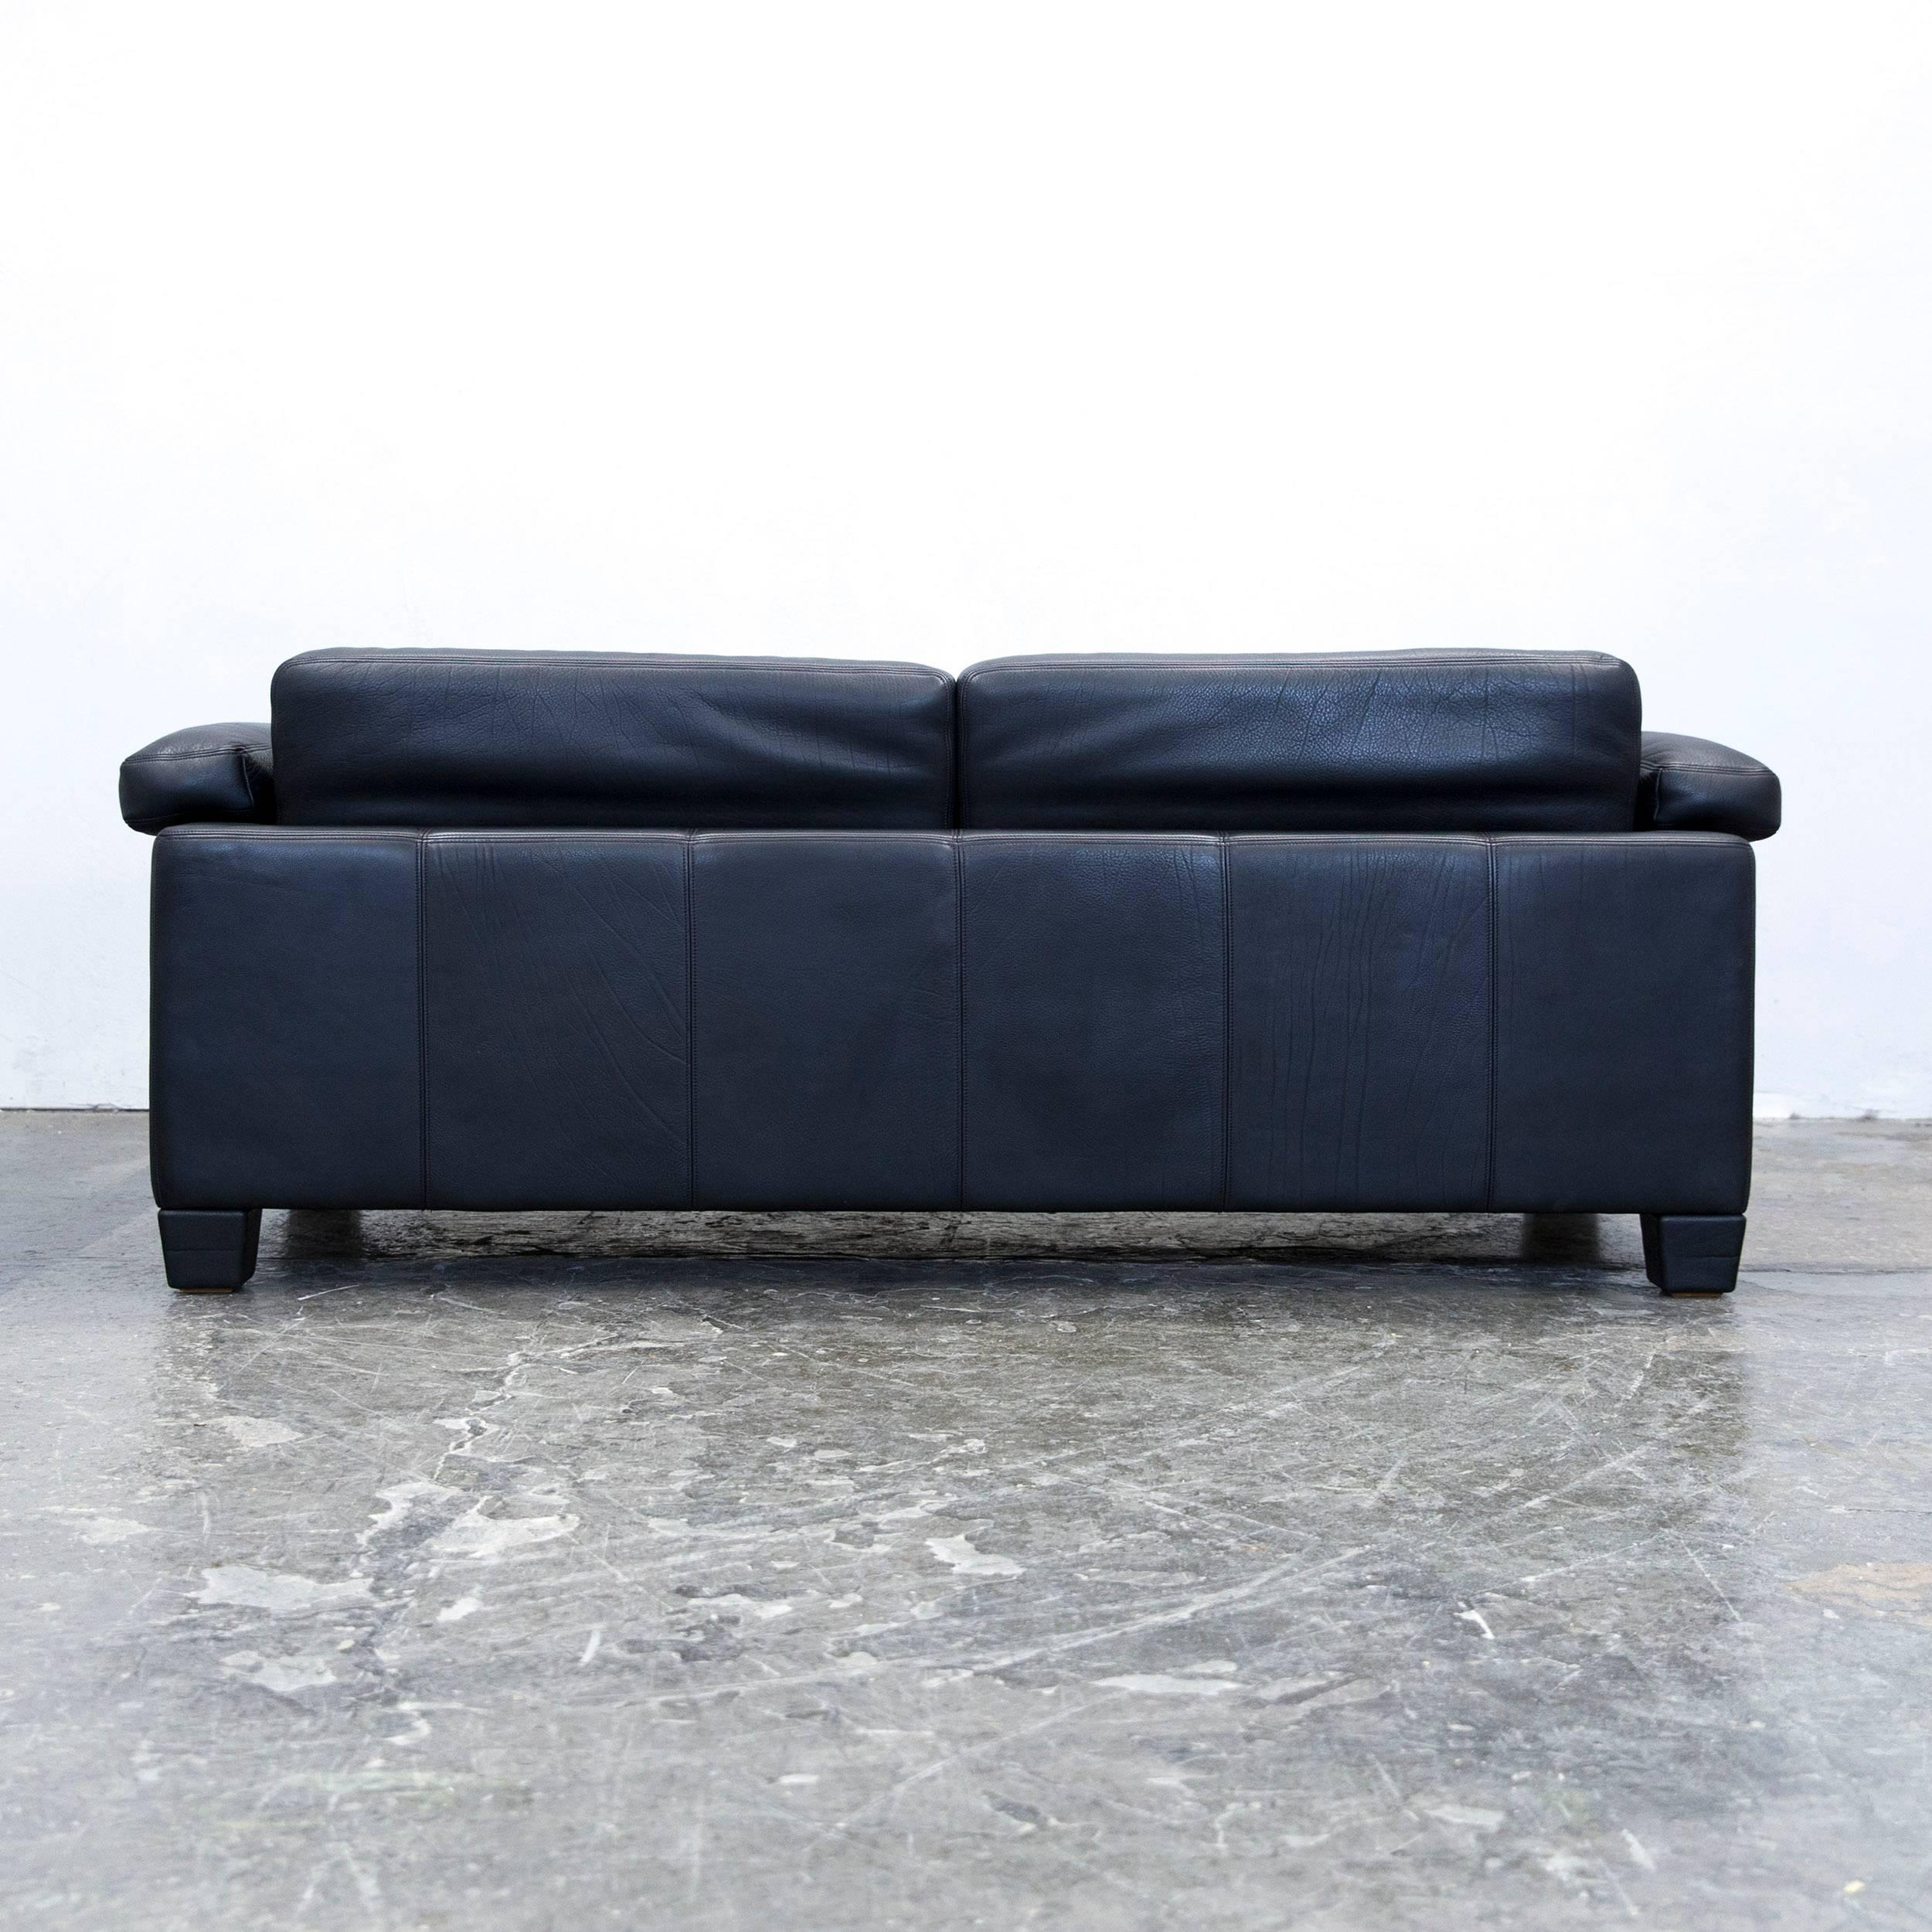 De Sede Ds 17 Designer Sofa Leather Black Two-Seat Couch Modern 4